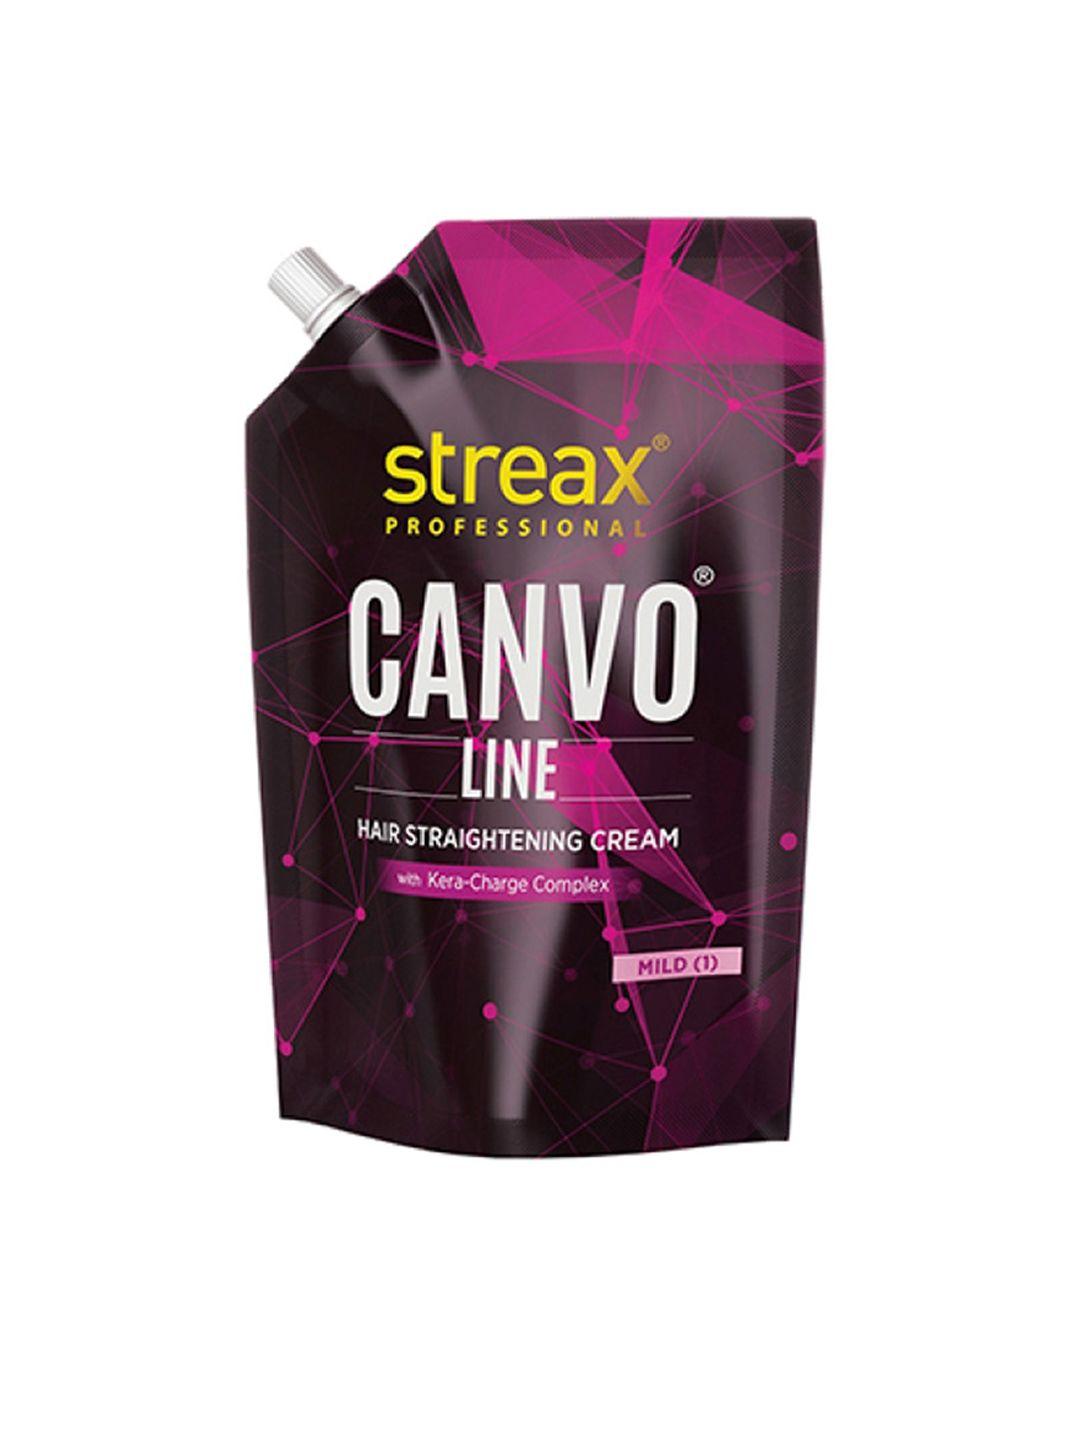 streax professional canvoline hair straightening cream with kera-charge 500 g - mild